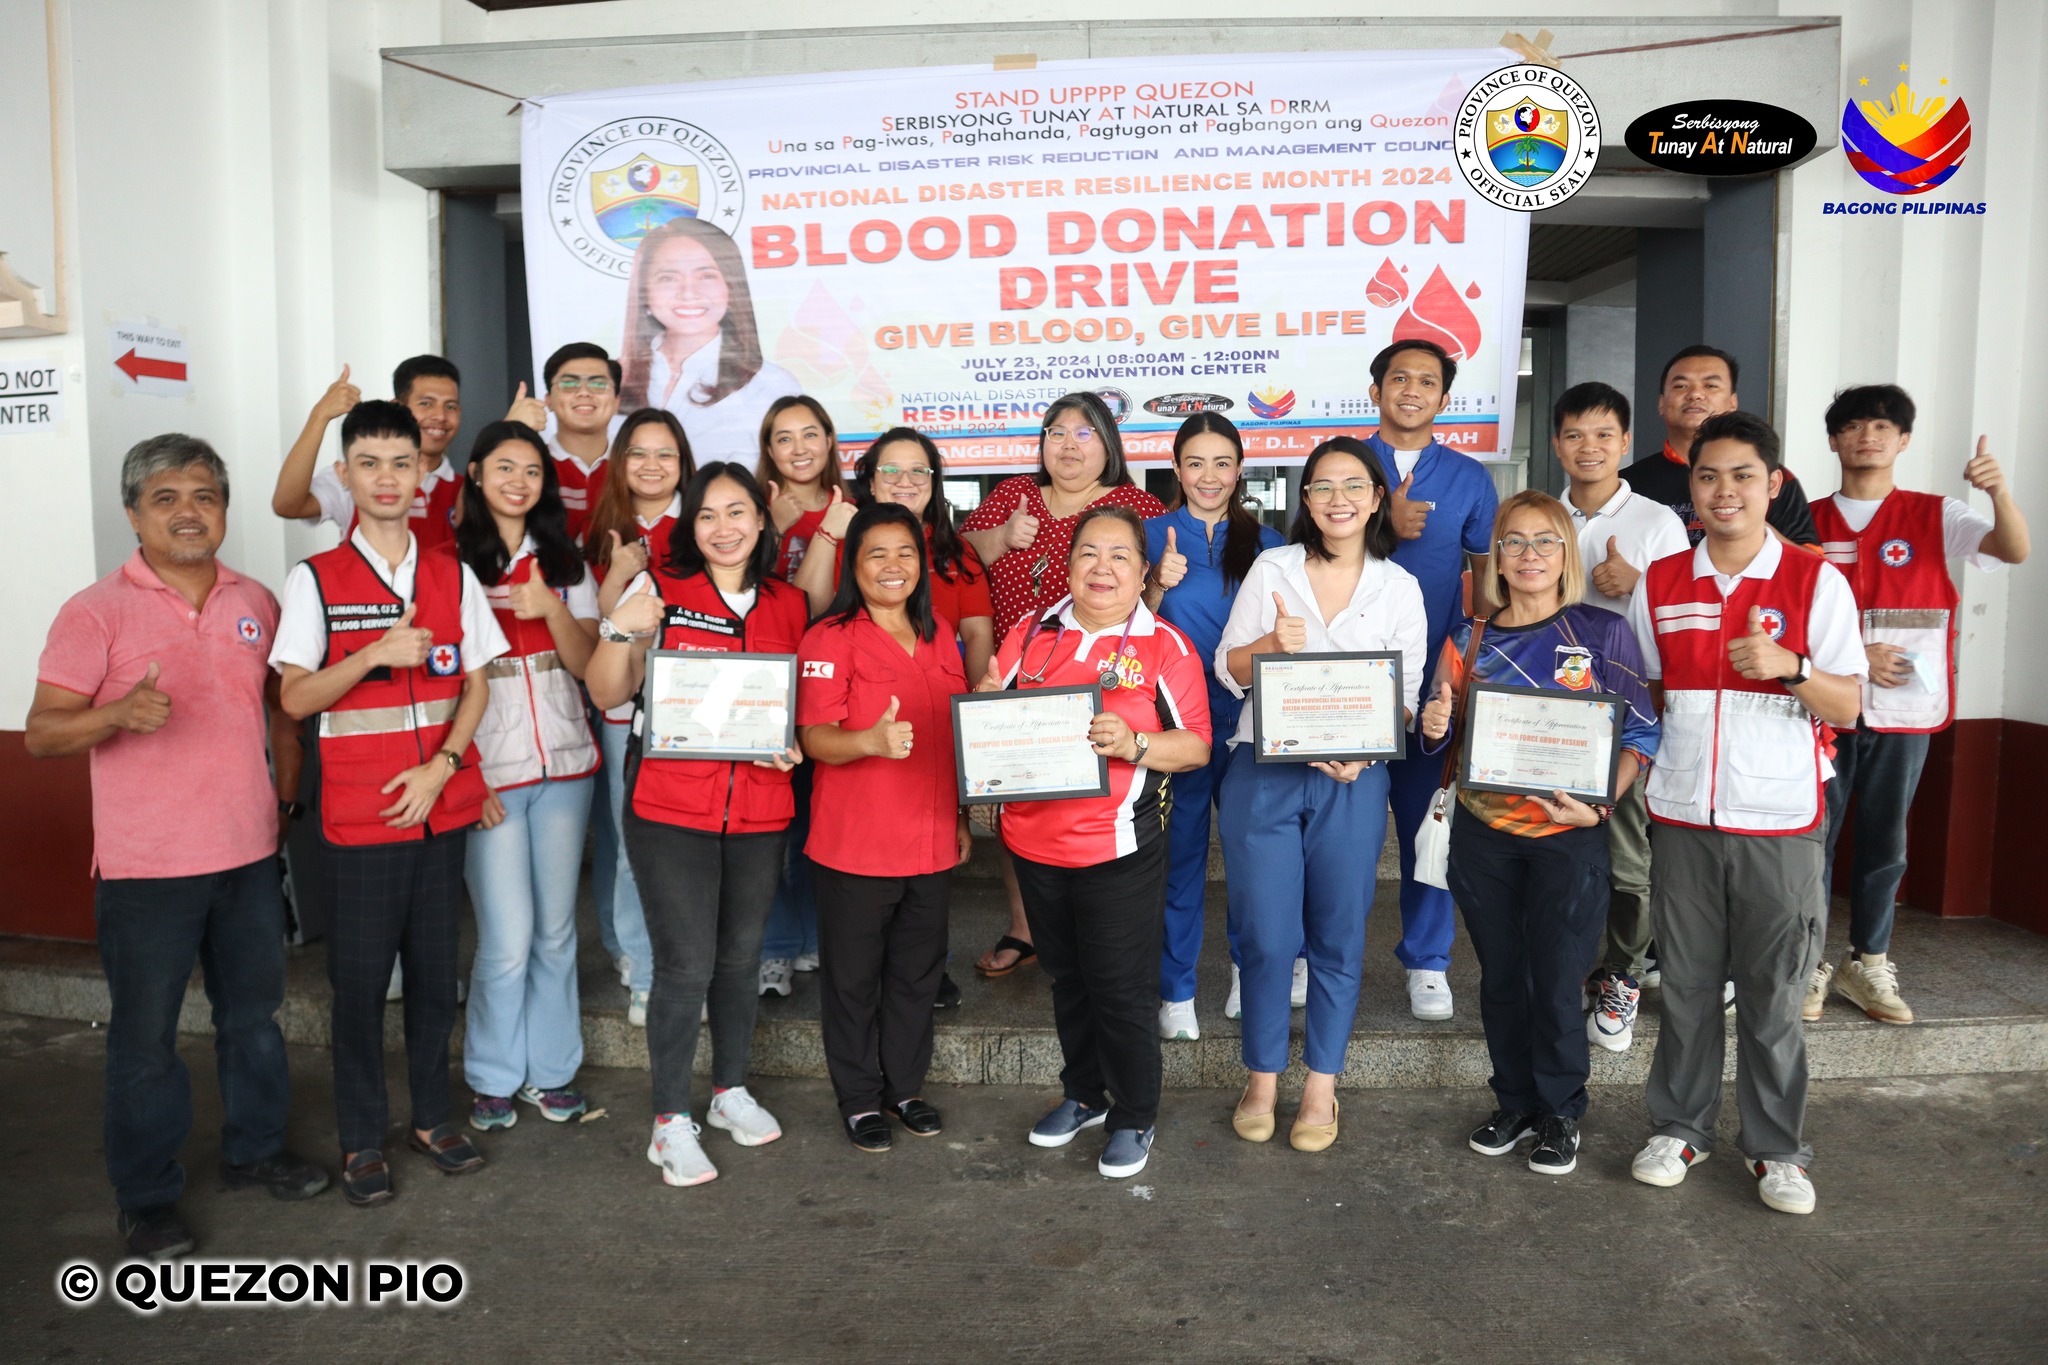 BLOOD DONATION DRIVE: Give Blood, Give Life | July 23, 2024